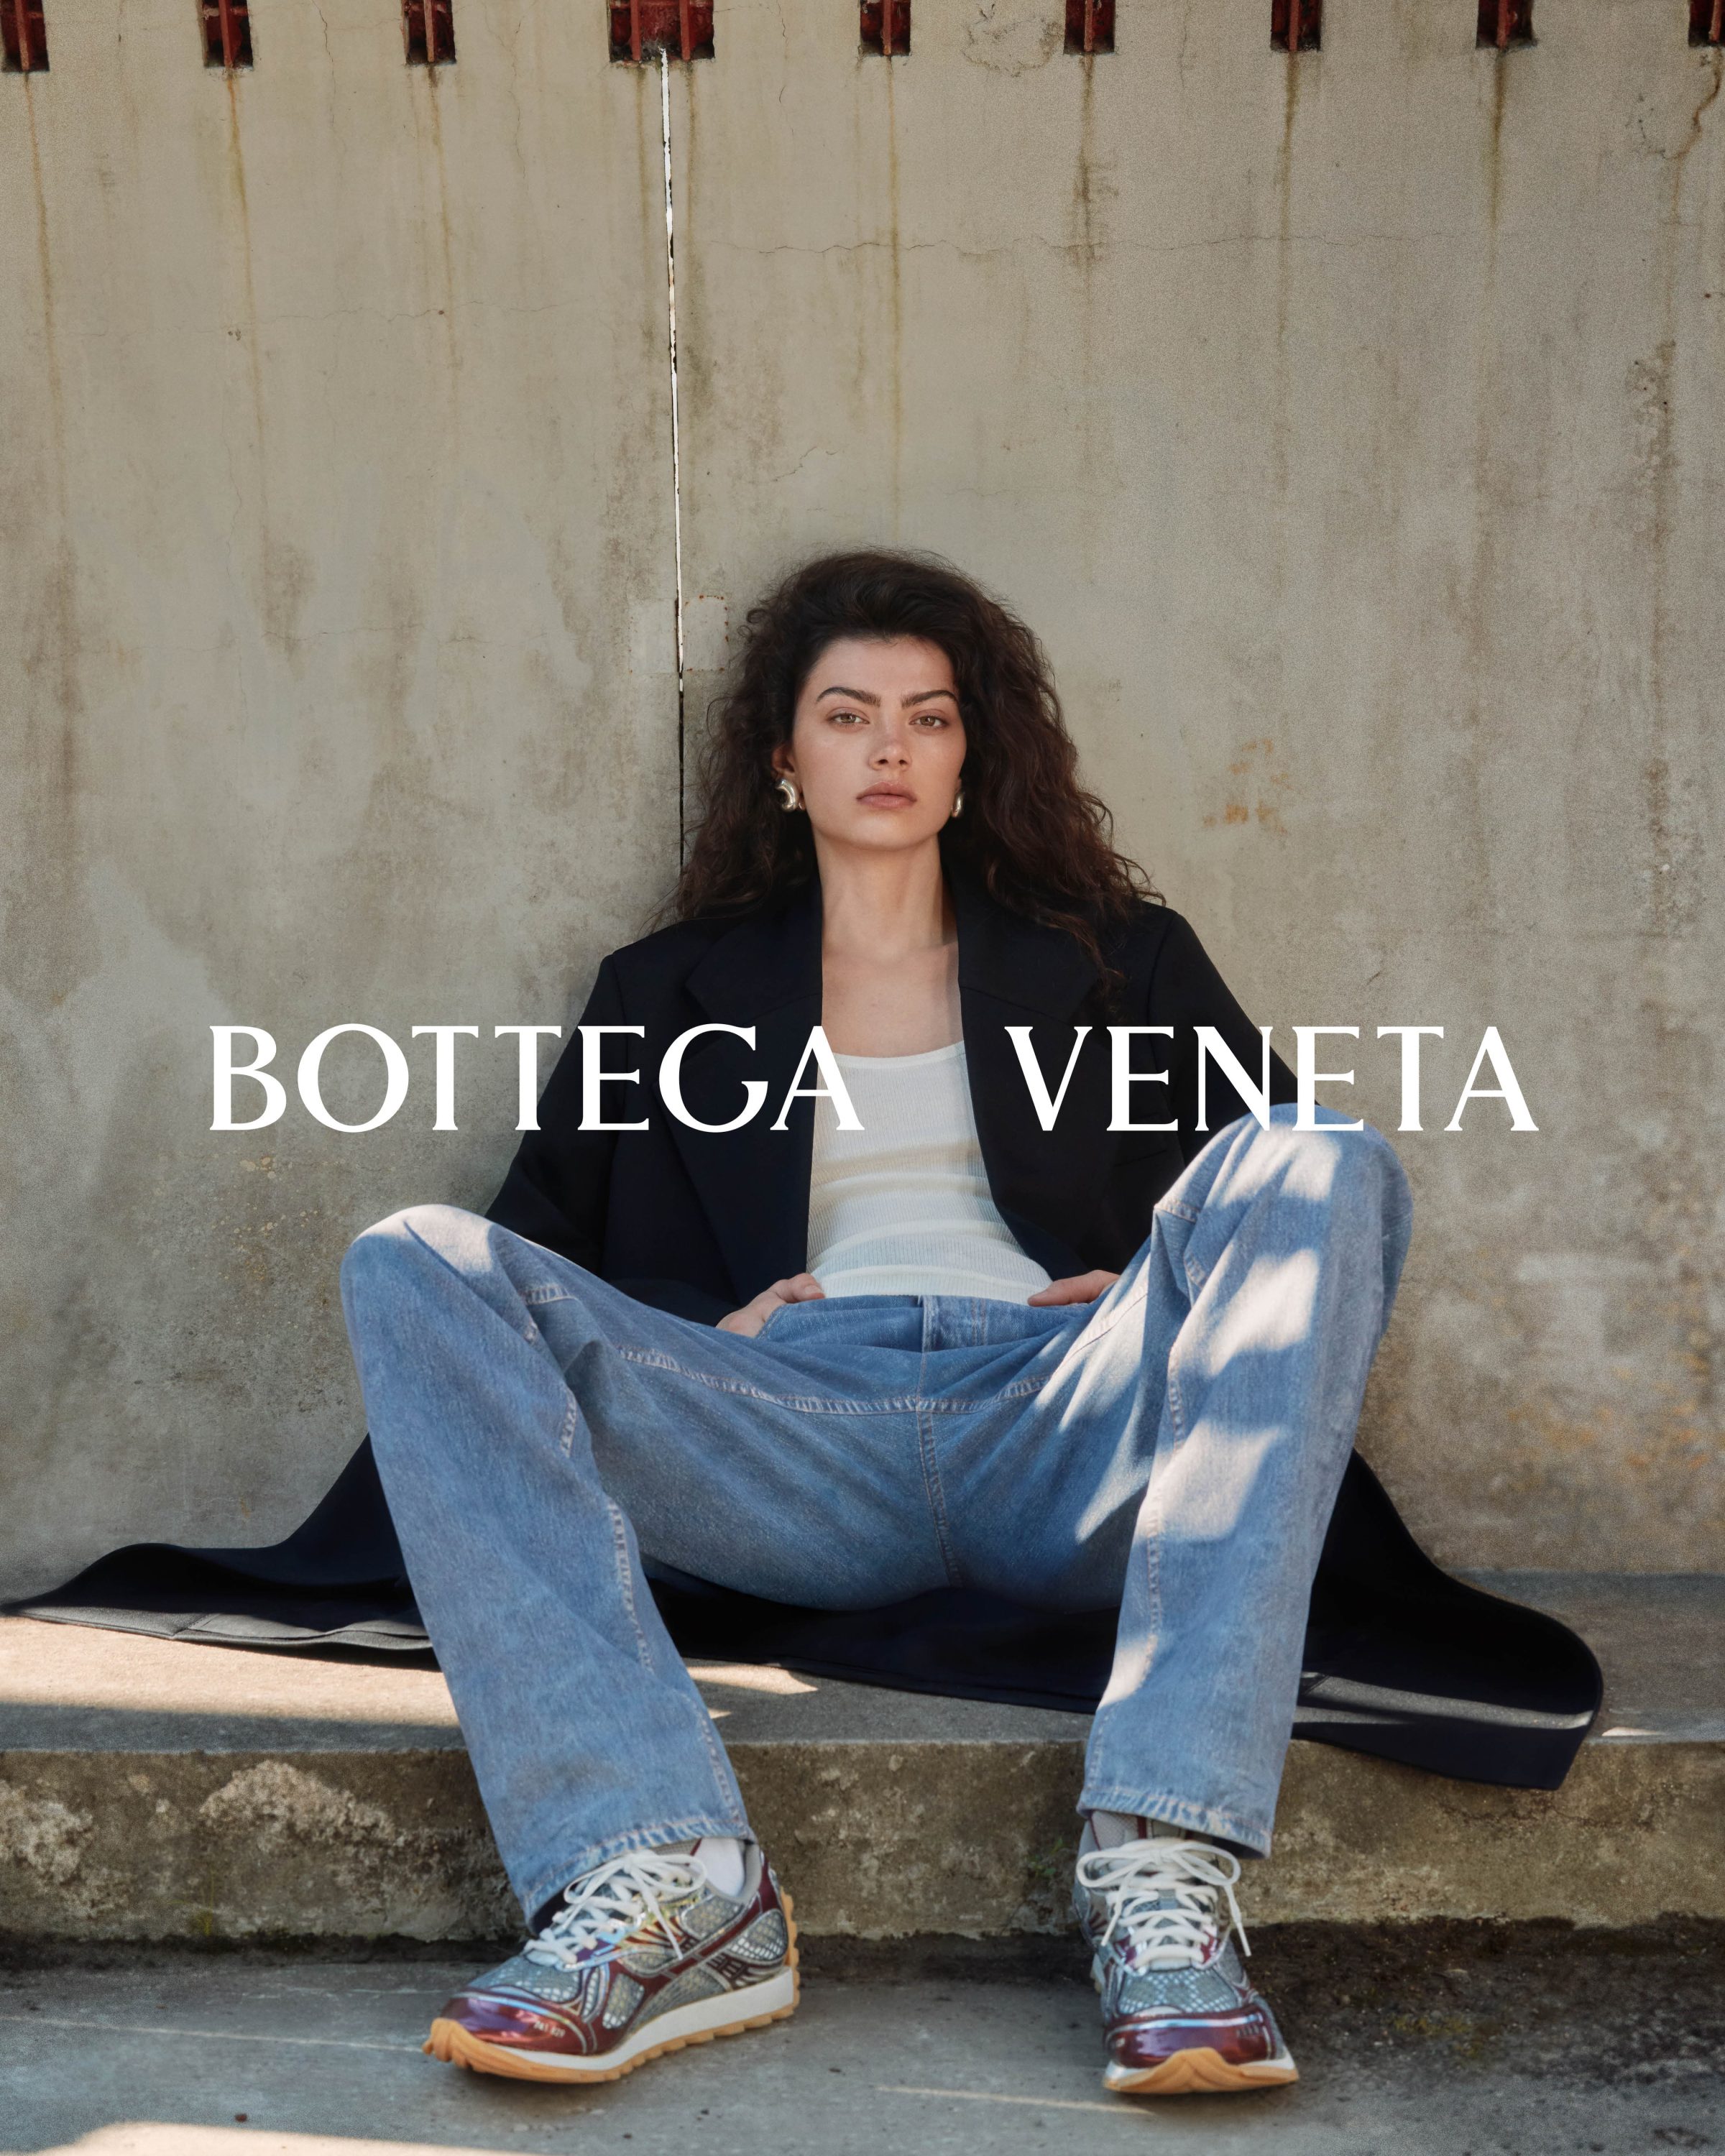 Matthieu Blazy's debut Bottega Veneta campaign is a holiday for the mind